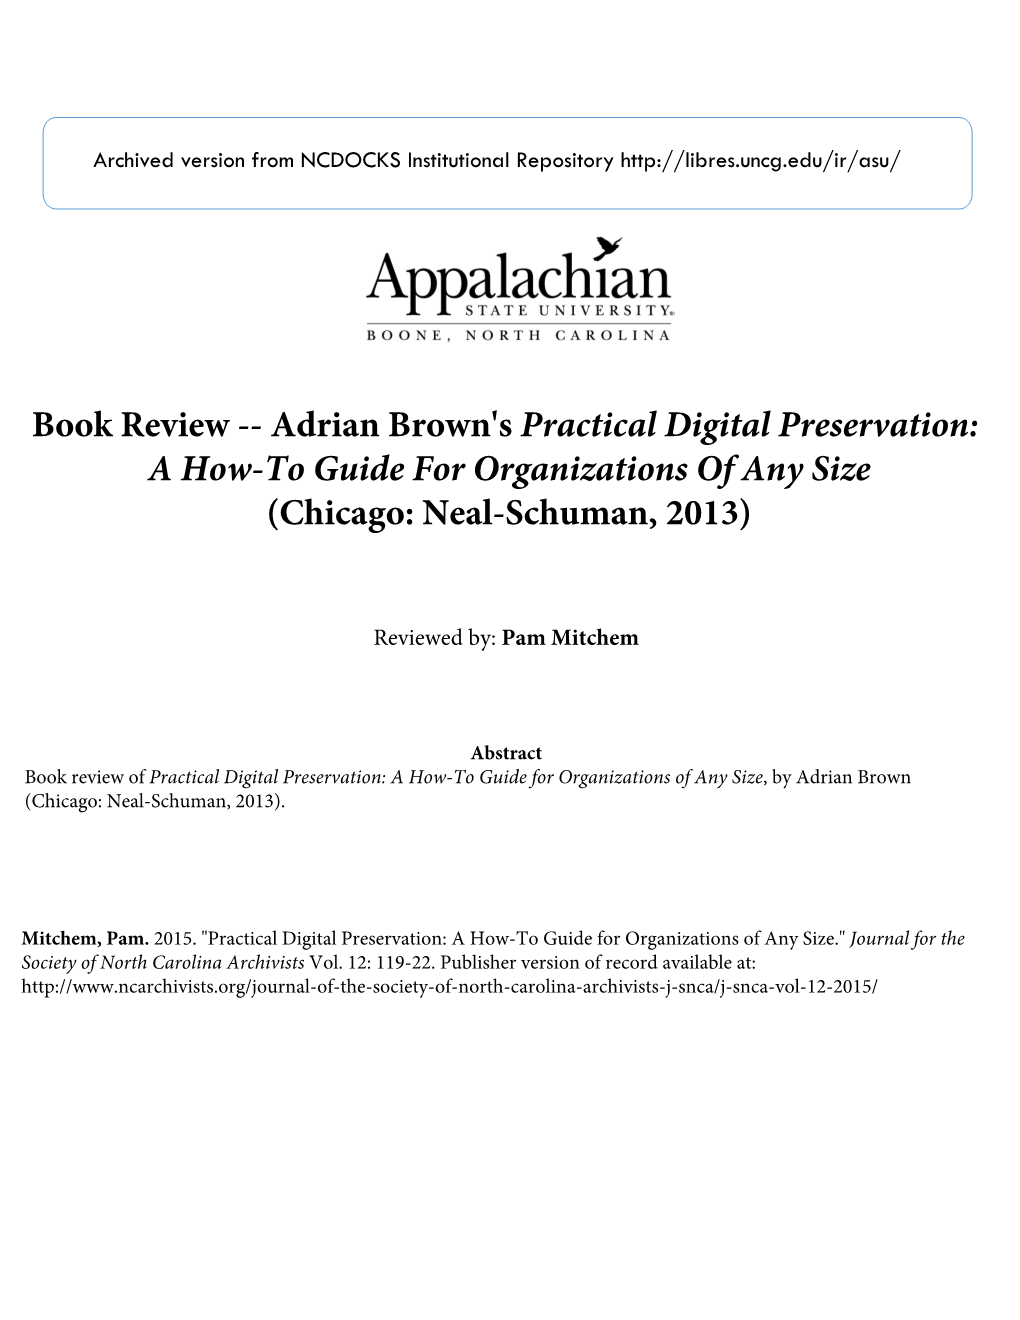 Adrian Brown's Practical Digital Preservation: a How-To Guide for Organizations of Any Size (Chicago: Neal-Schuman, 2013)